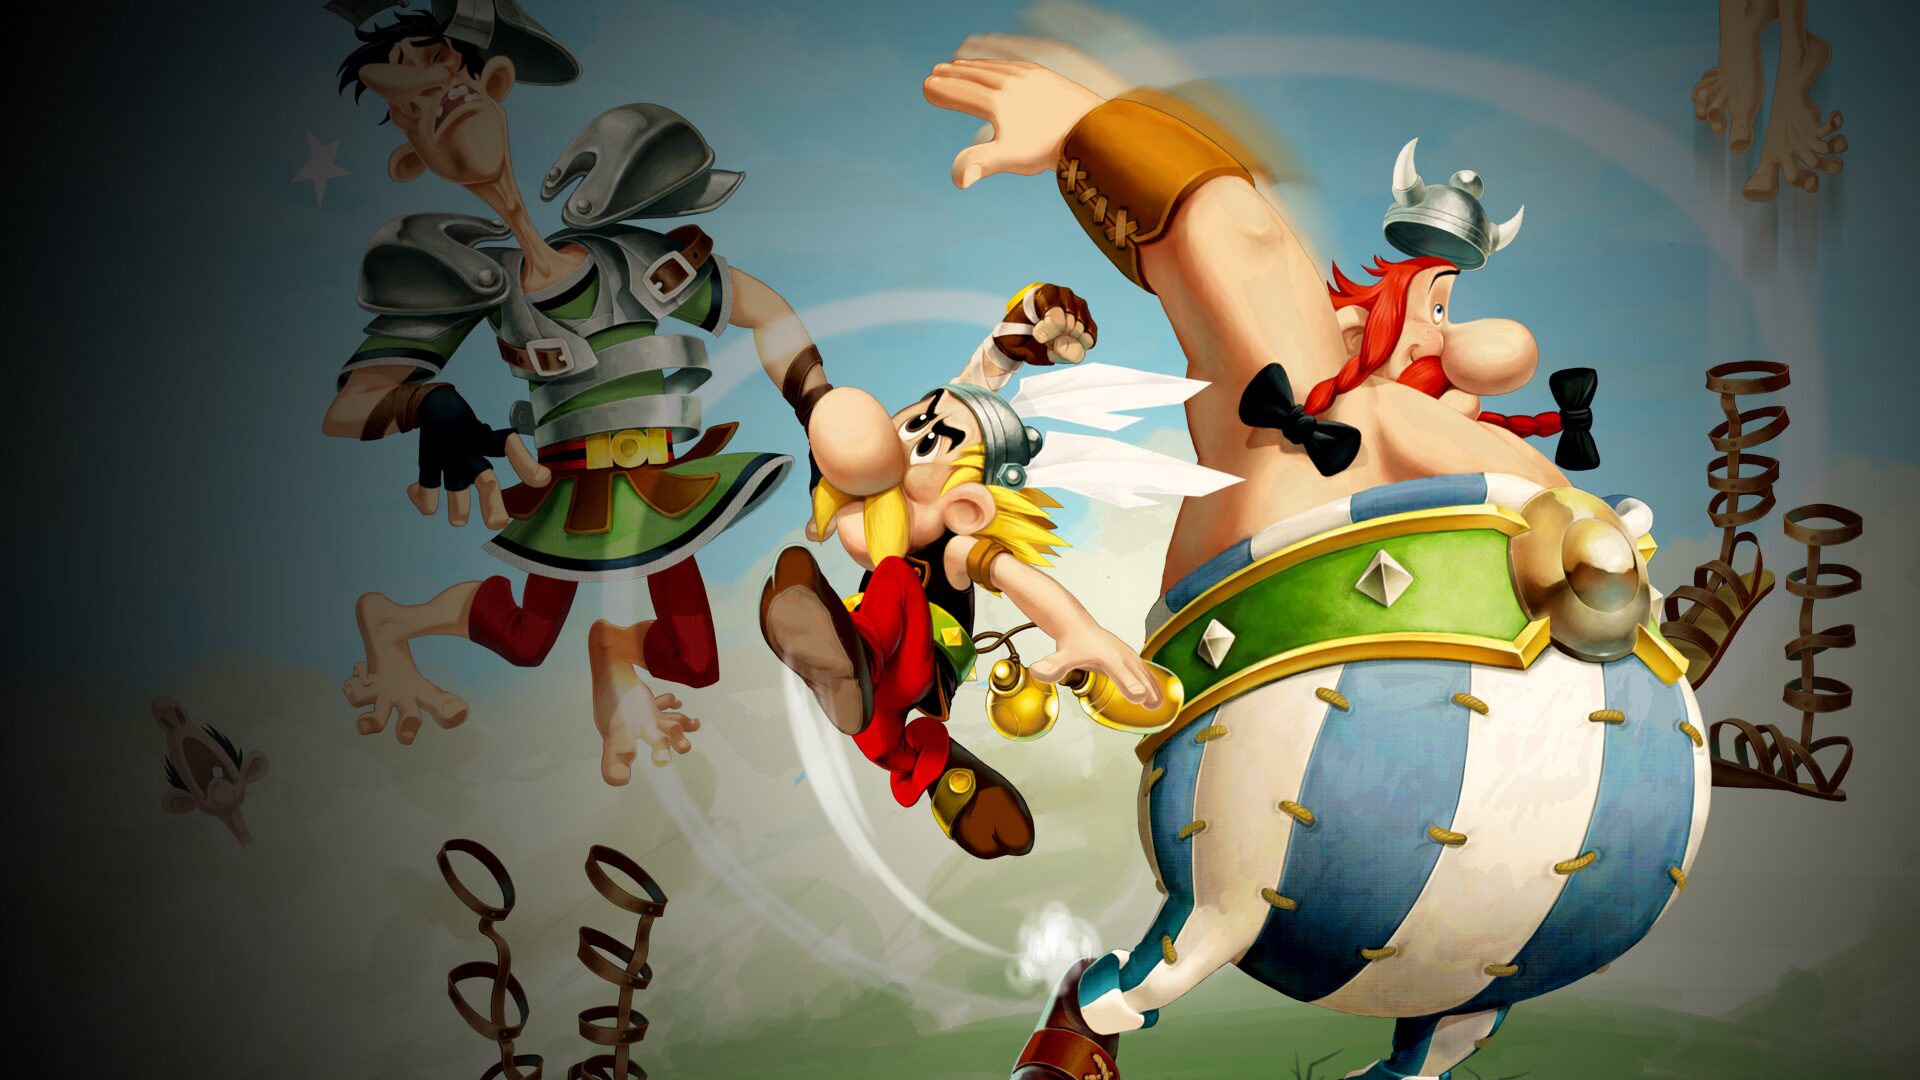 Asterix ＆ Obelix XXL 2 (Simplified Chinese, English, Korean, Traditional Chinese)